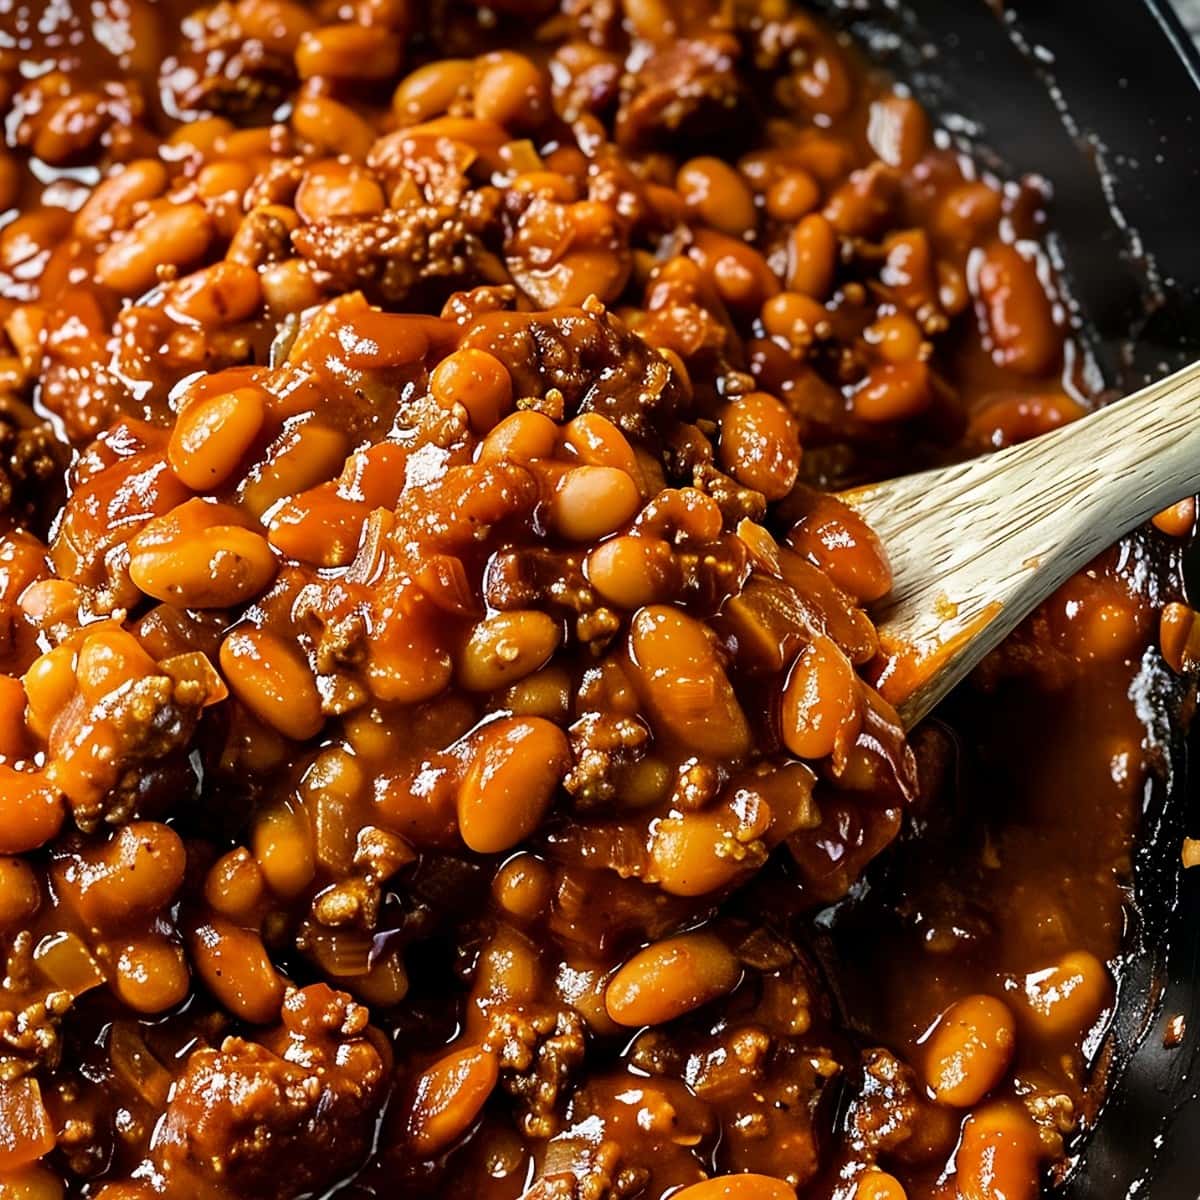 Super Close Up of BBQ Baked Beans in a Skillet with Ground Beef, Sauce, Onions, and Beans